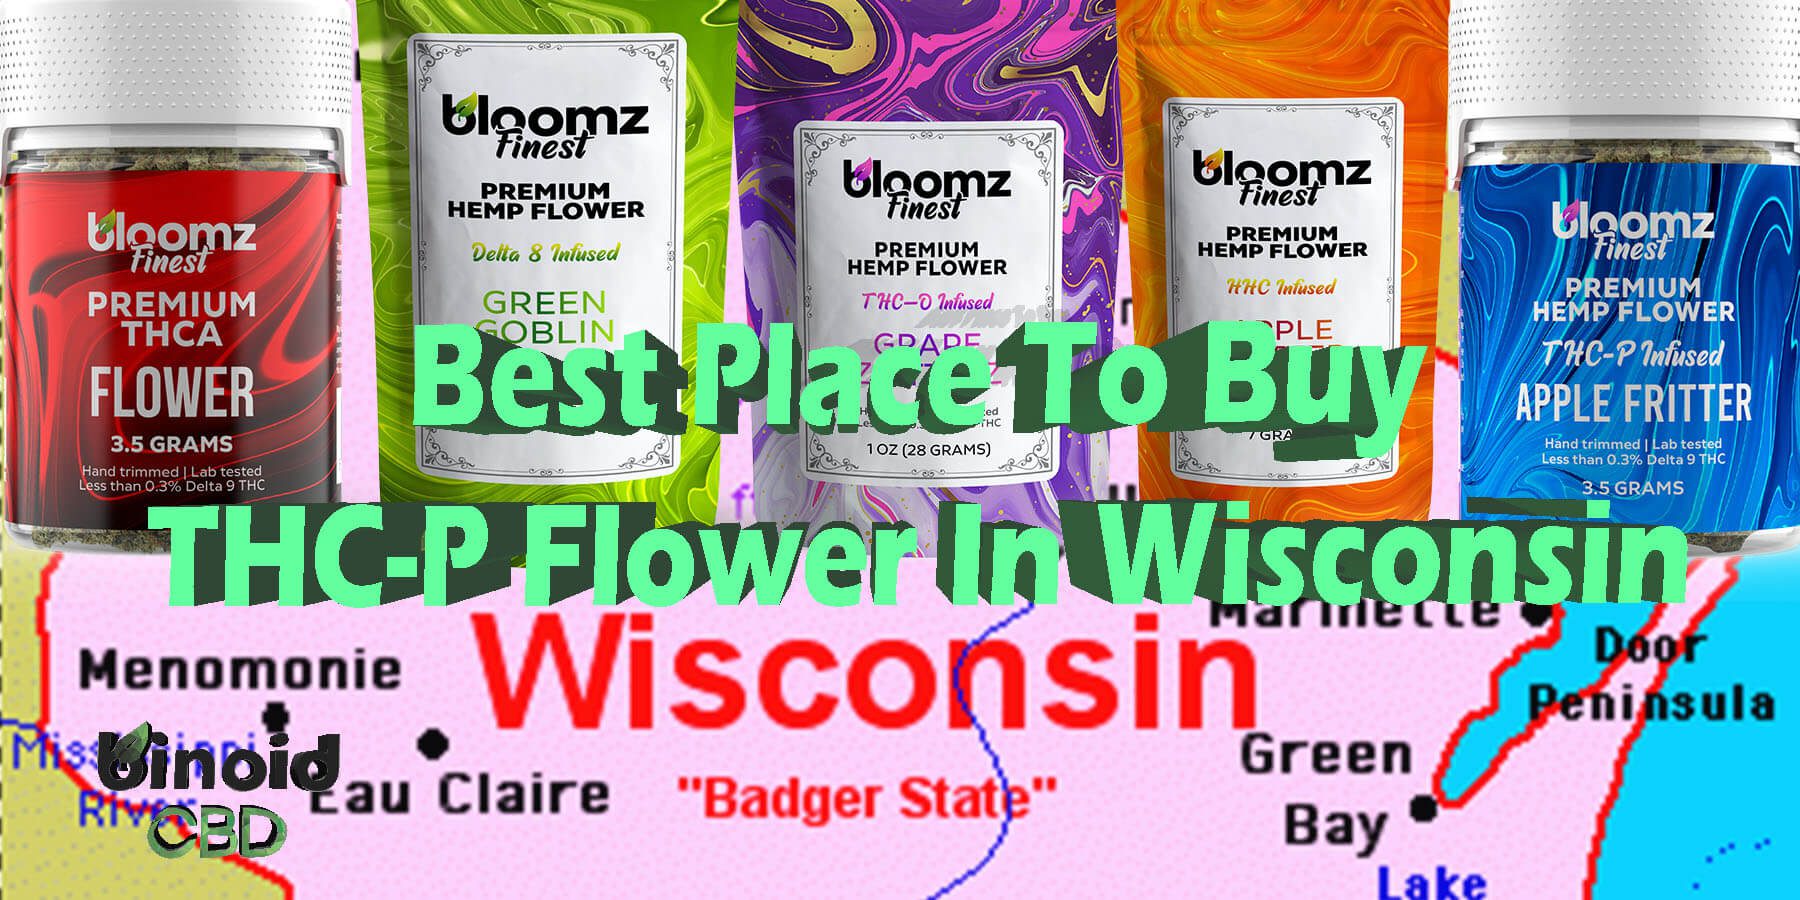 Buy THCP Flower Wisconsin Get Online Near Me For Sale Best Brand Strongest Real Legal Store Shop Reddit